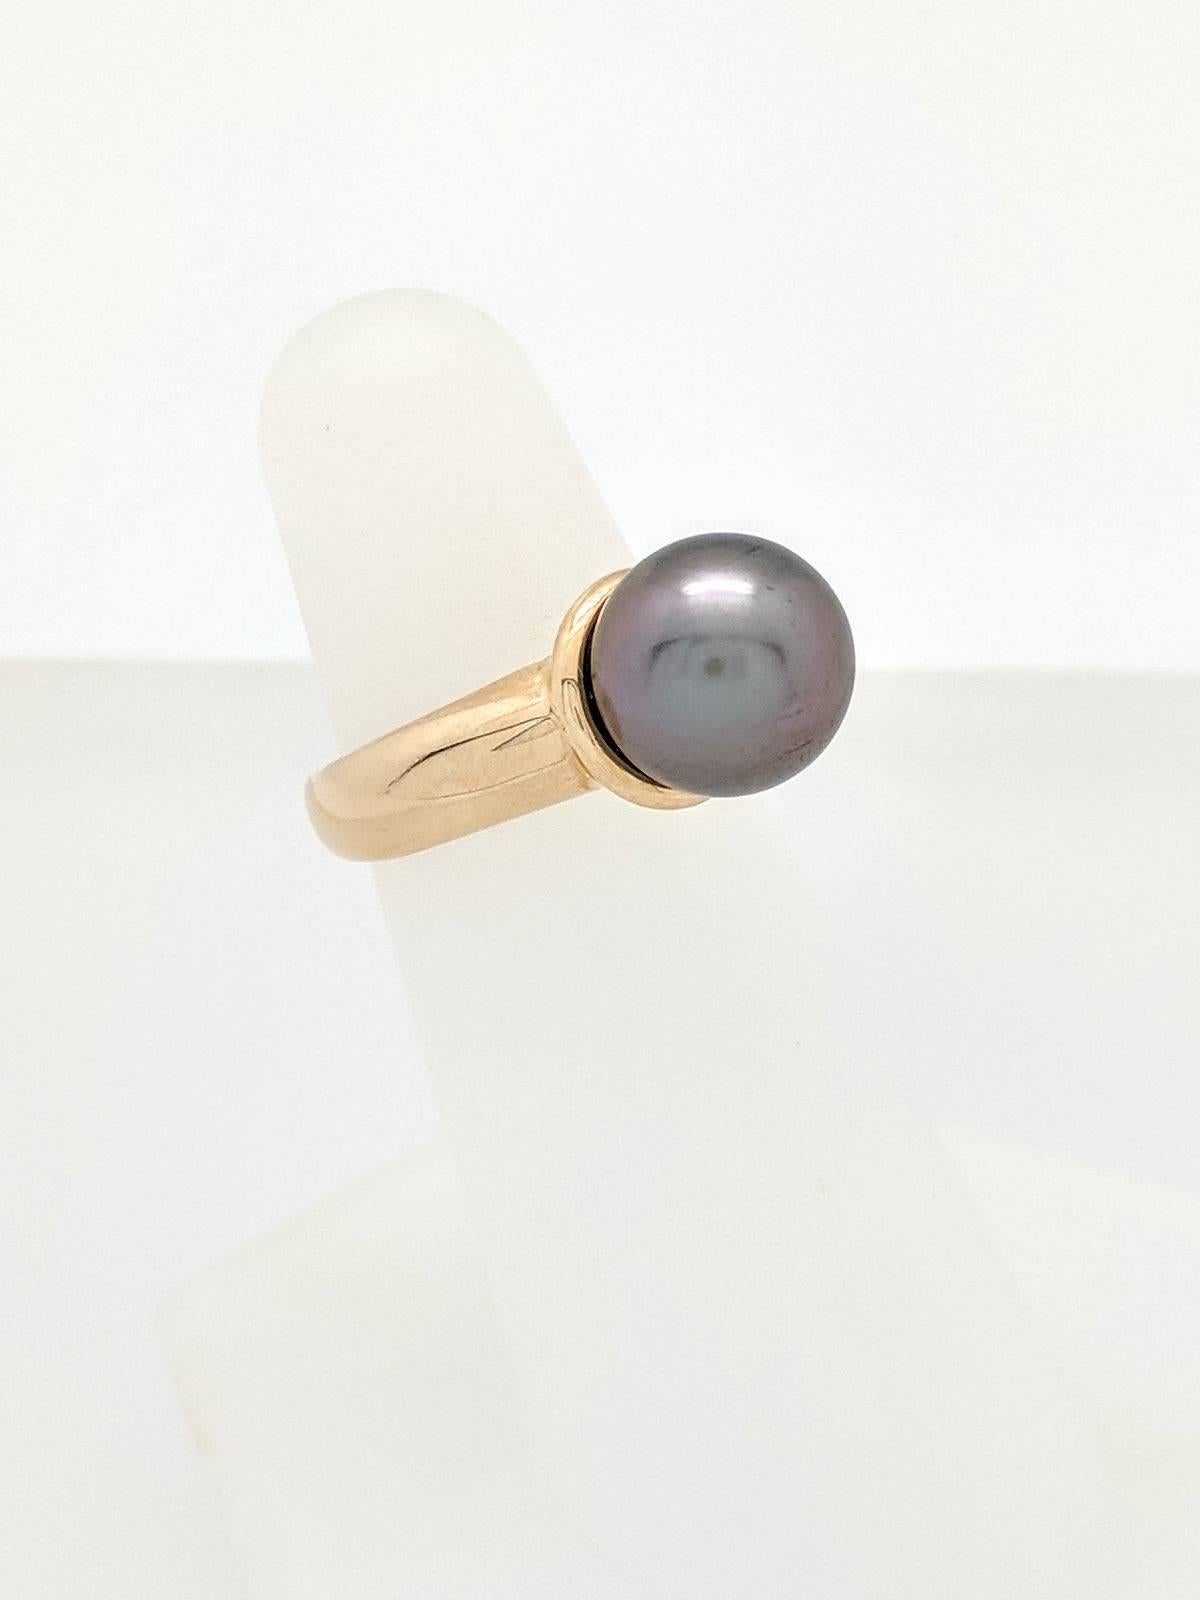  Ladies 14k Yellow Gold 10mm Tahitian Pearl Ring Size 5 5.4 Grams

You are viewing a Beautiful Ladies Tahitian Pearl Ring. This ring is crafted from 14k yellow gold and weighs 5.4 grams.  It features one (1) 10mm Tahitian pearl.  This ring is